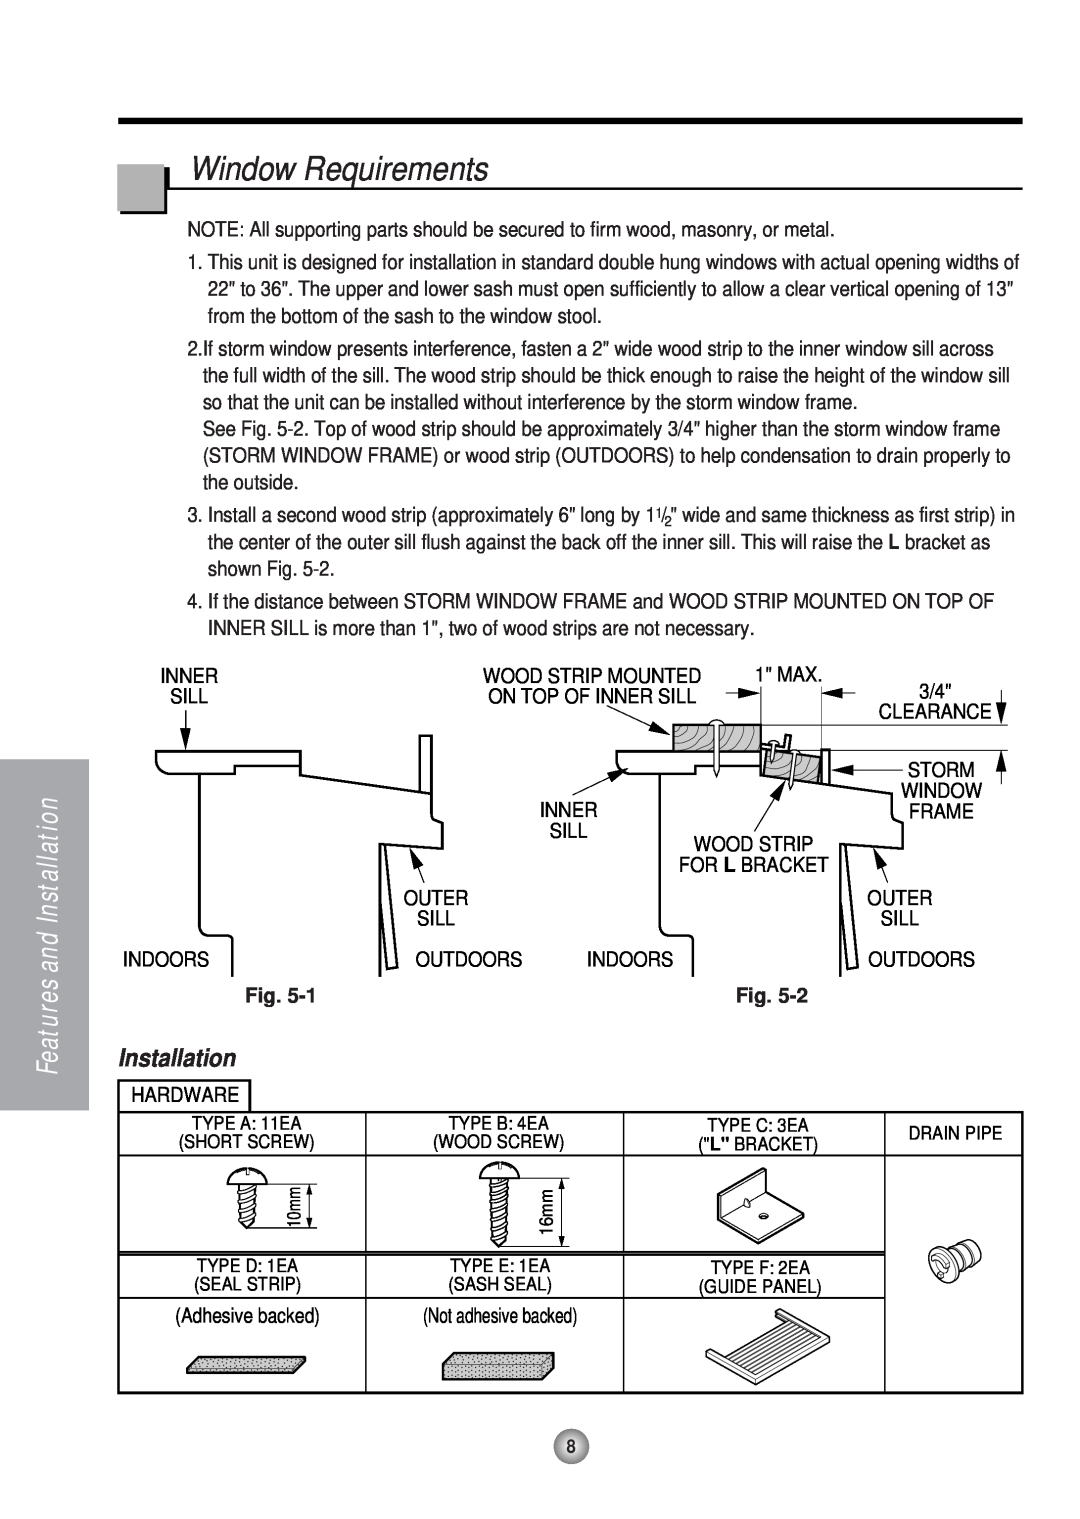 Panasonic HQ-2051RH manual Window Requirements, Features and Installation 